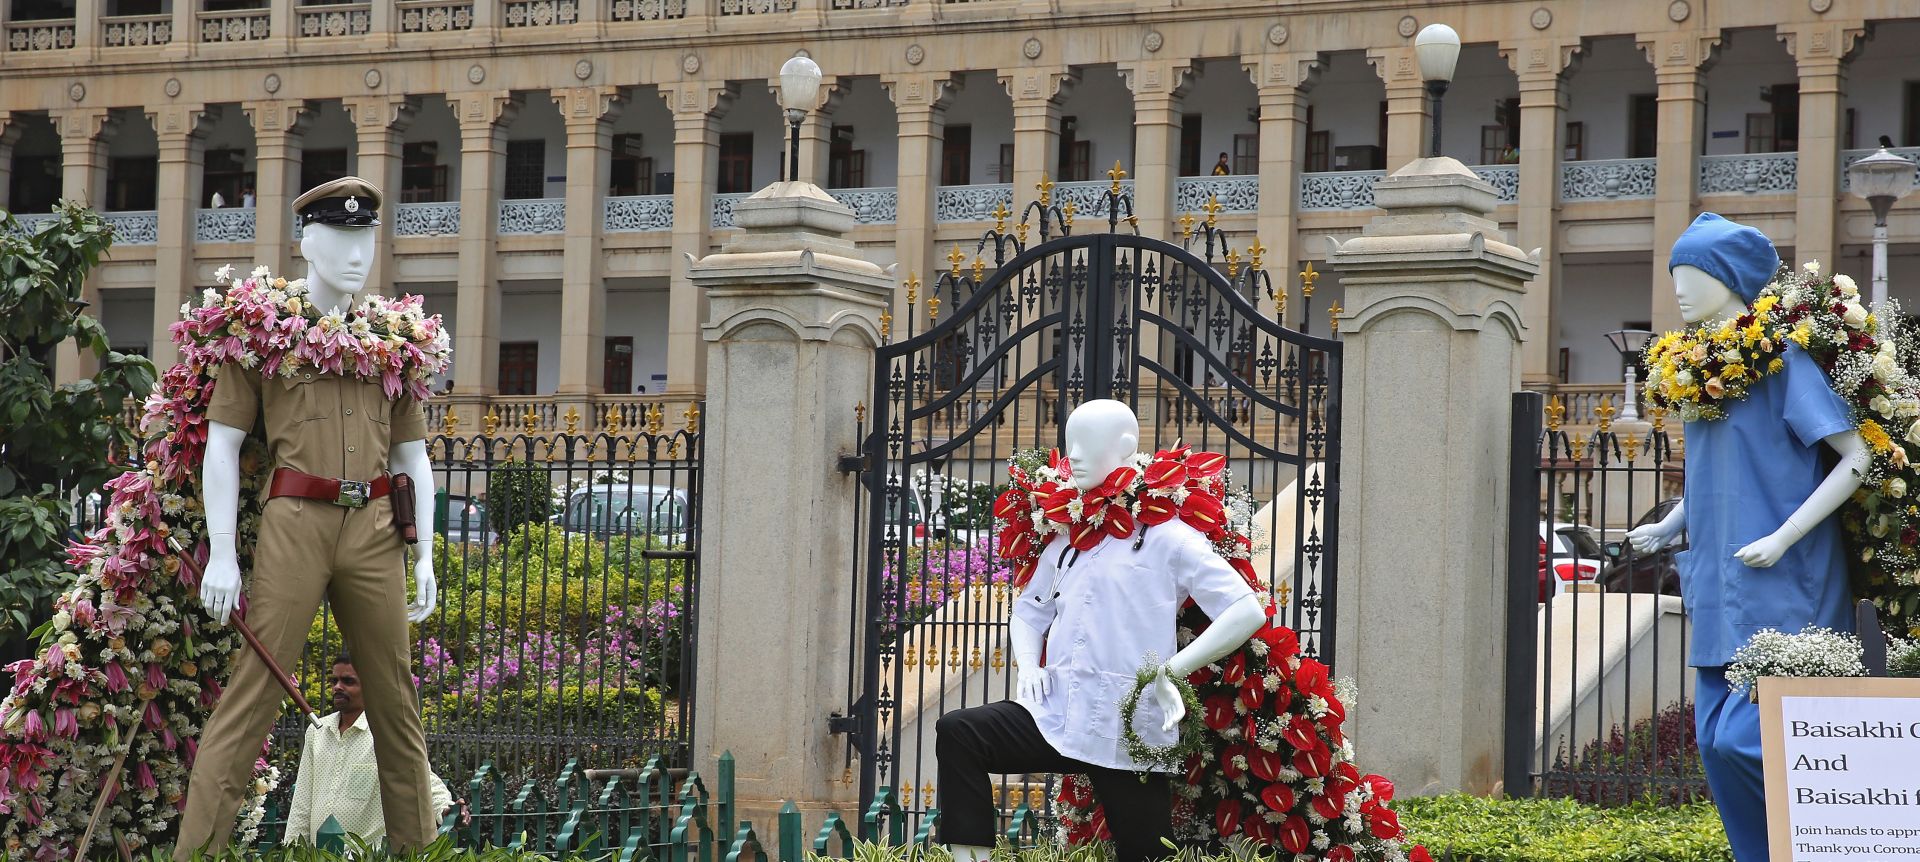 epa08478844 Statues of a police officer, a doctor, and nurse, forming the so-called 'Corona Warriors', in front of the Vidhana Soudha, the seat of the State Legislature of Karnataka, in Bangalore, India, 11 June 2020.  The stautes were installed to show solidarity for their services during the coronavirus emergency lockdown. The Indian government has eased some coronavirus related restrictions but has said the lockdown will continue until 30 June, in 'containment zones’.  EPA/JAGADEESH NV